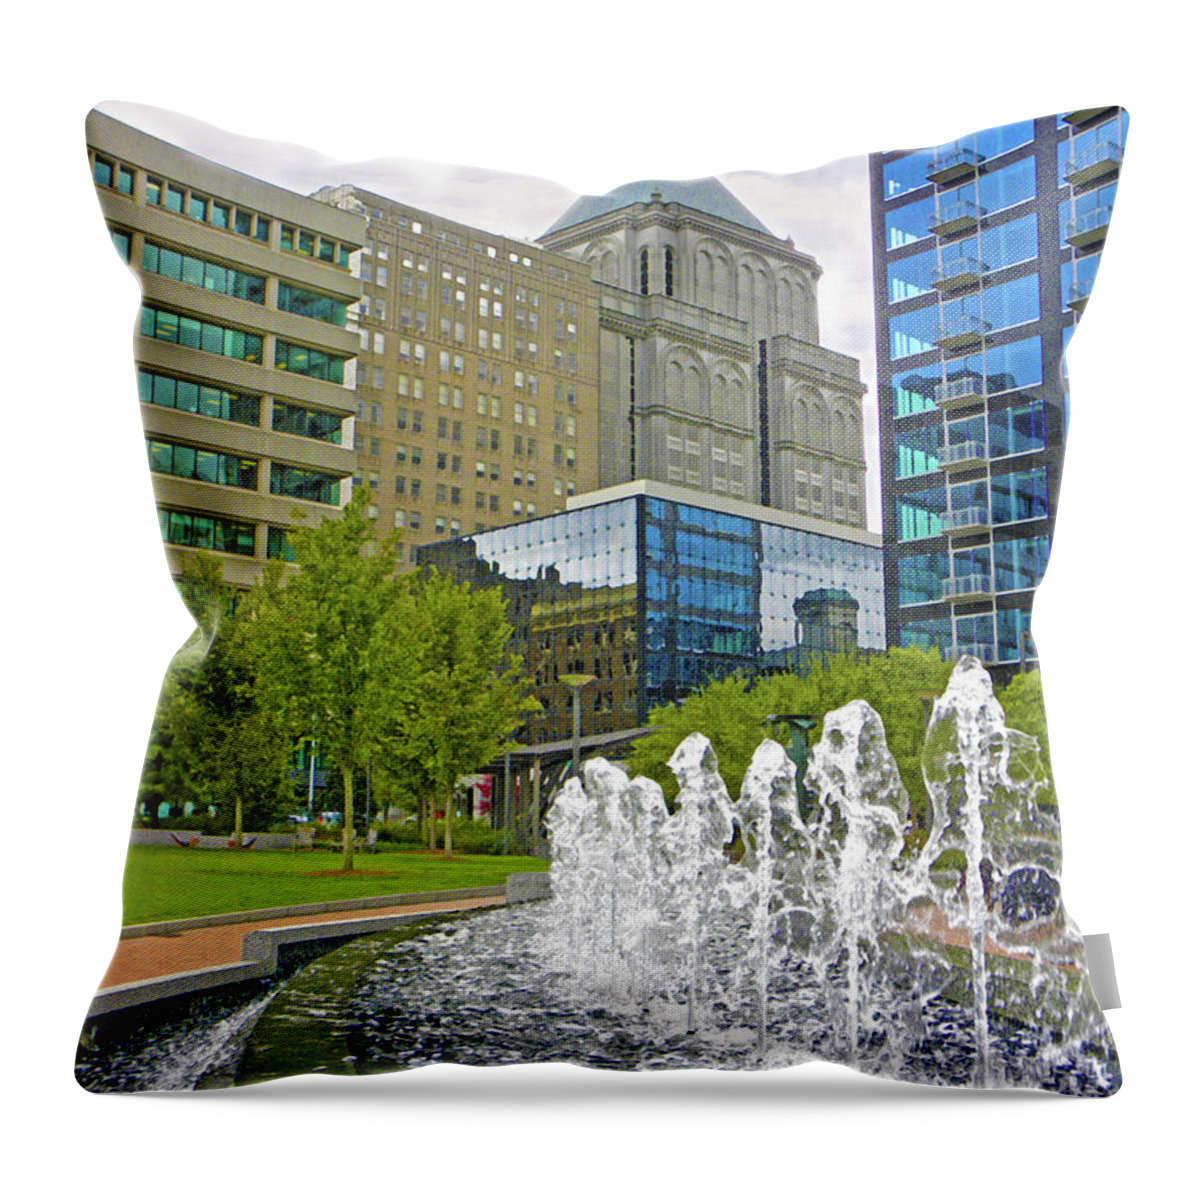 Downtown Buildings Reflection Throw Pillow featuring the photograph Downtown Buildings Reflections by Sandi OReilly